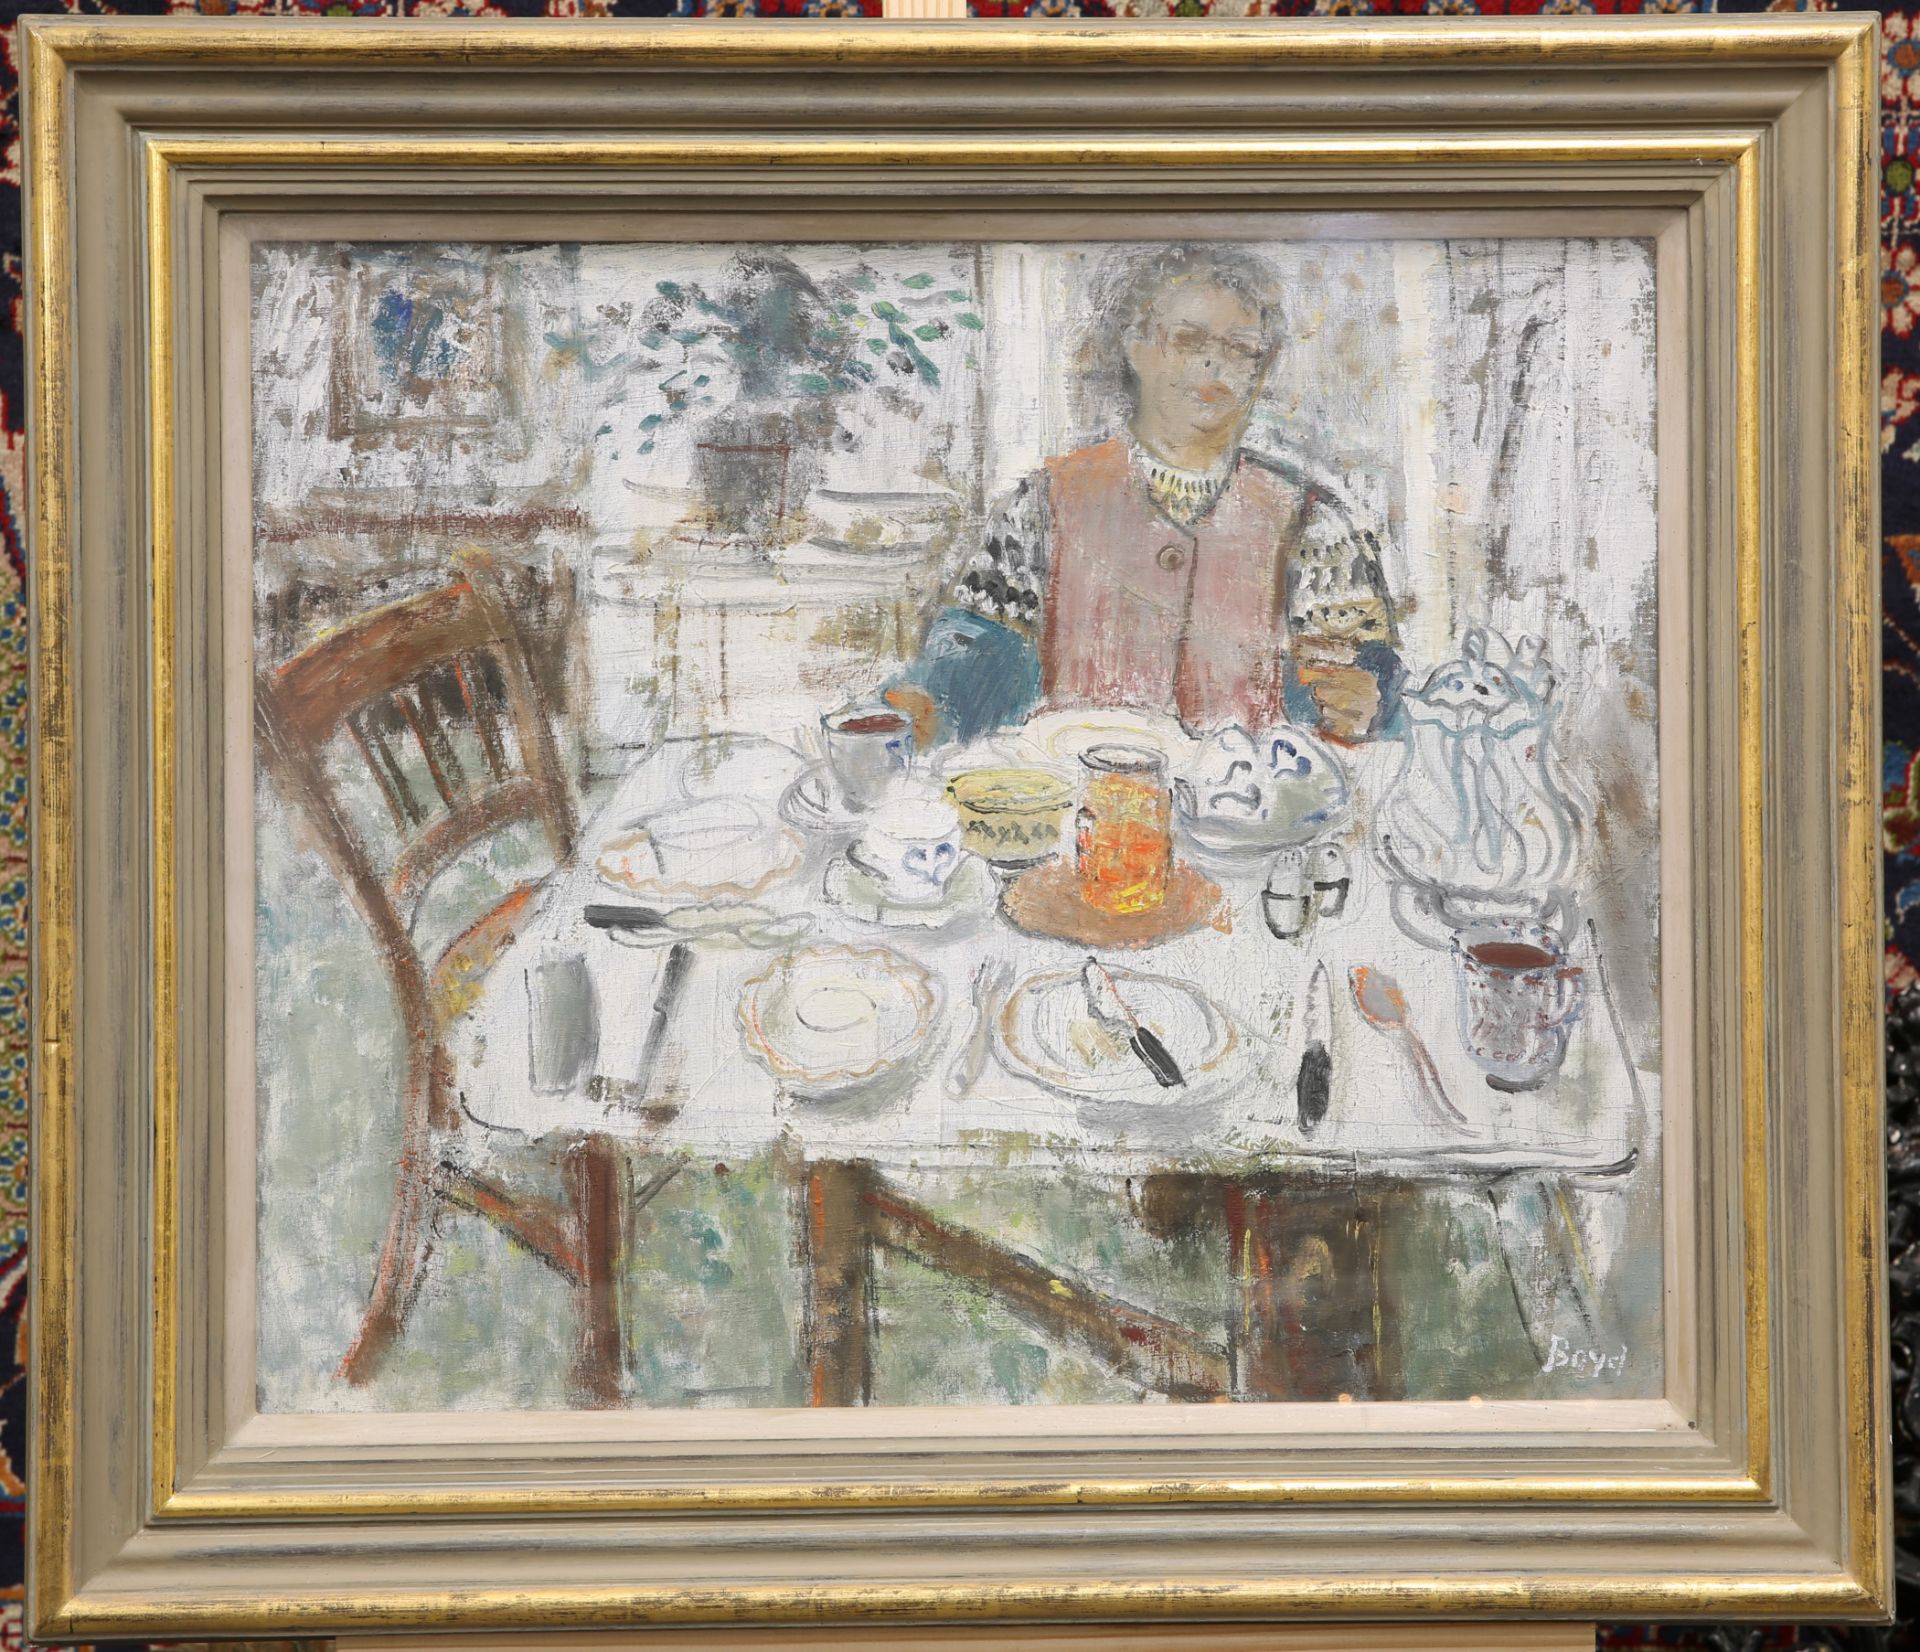 JOHN G. BOYD (SCOTTISH, 1940-2001), "BREAKFAST TIME", signed lower right, The Contemporary Fine - Image 2 of 2